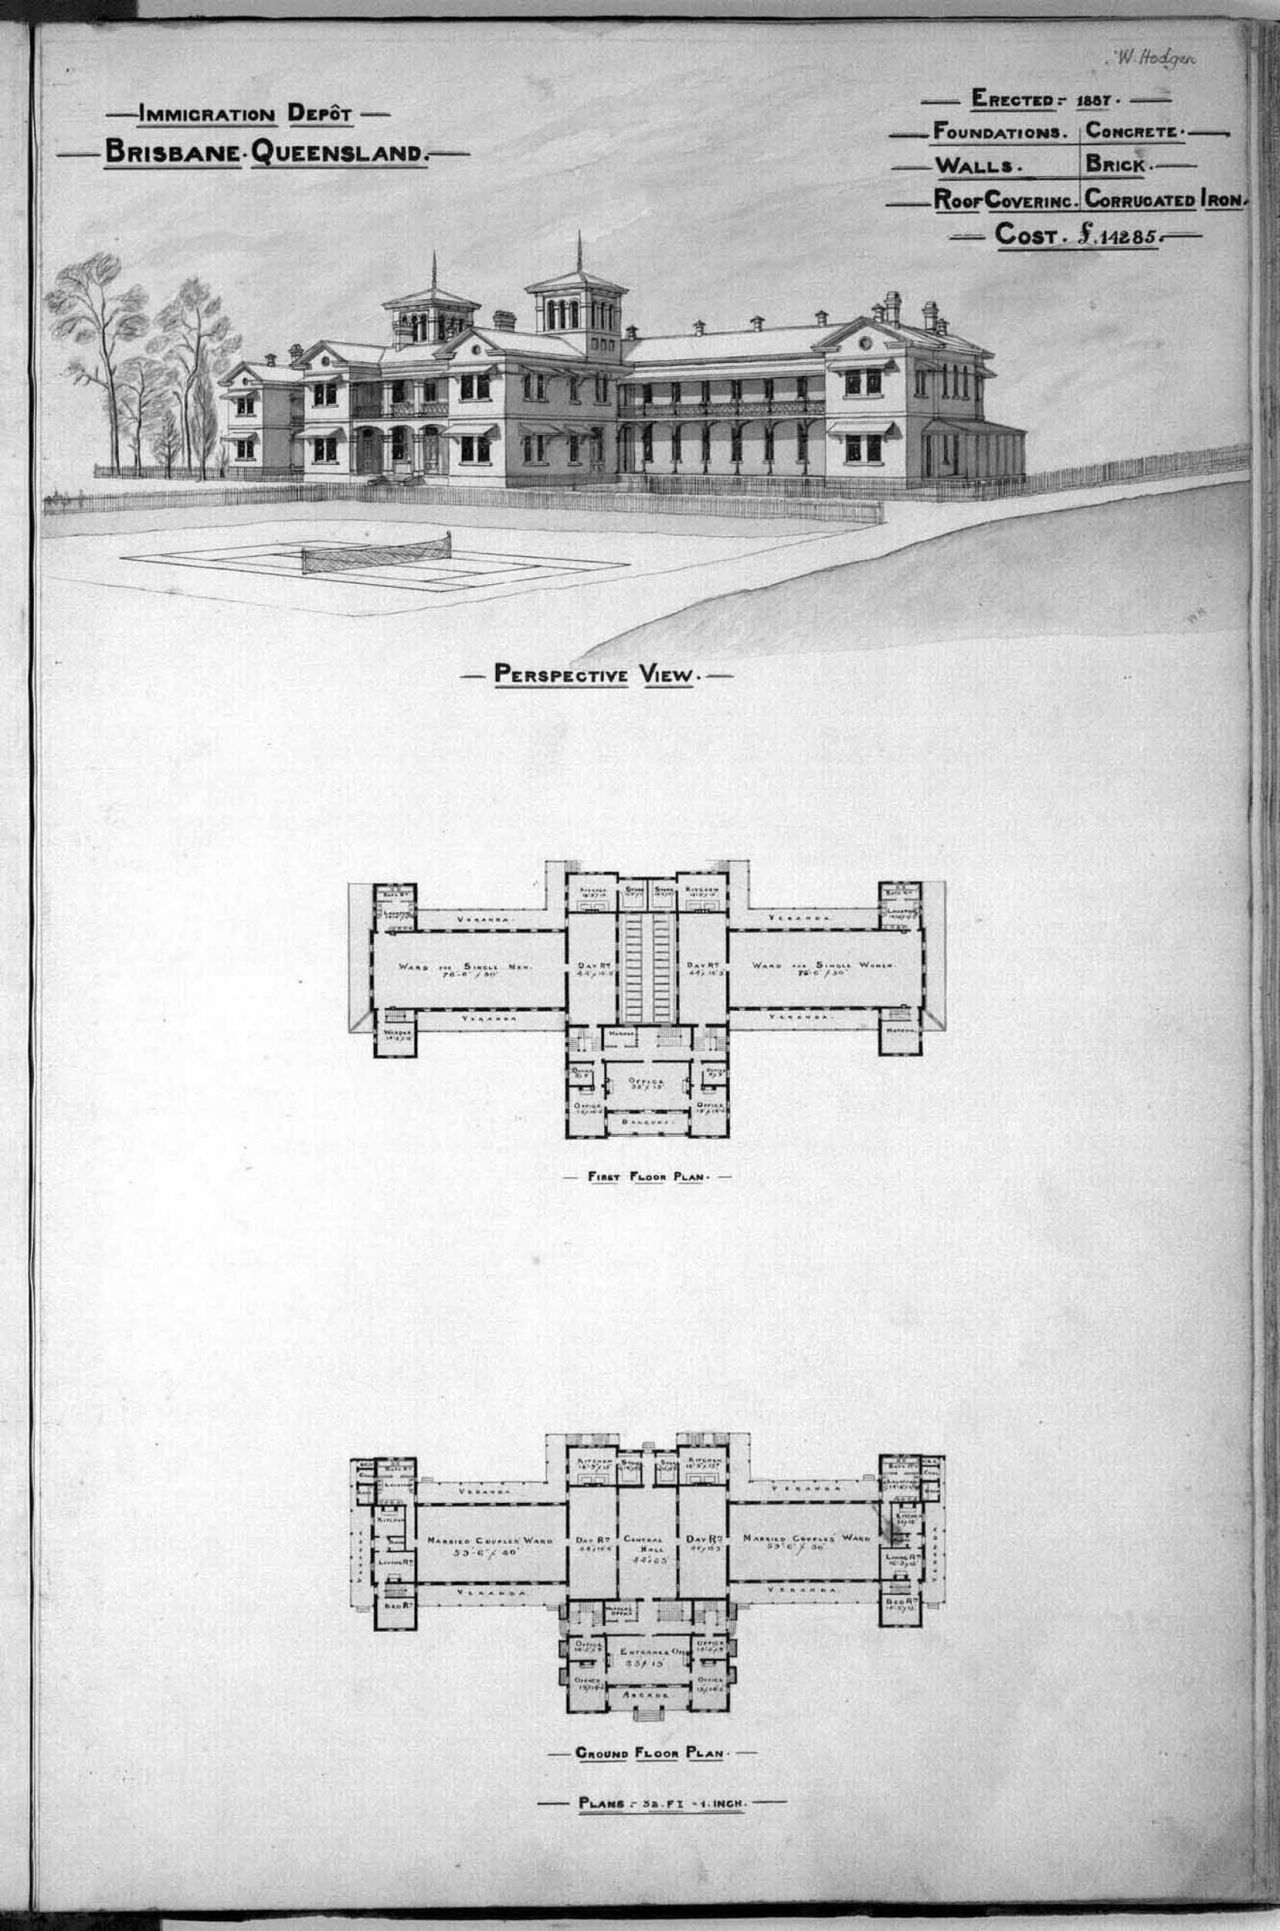 1888 / Architectural plans and perspective drawing of the Immigration Depot, Brisbane / Queensland State Archives / Digital ID 2580